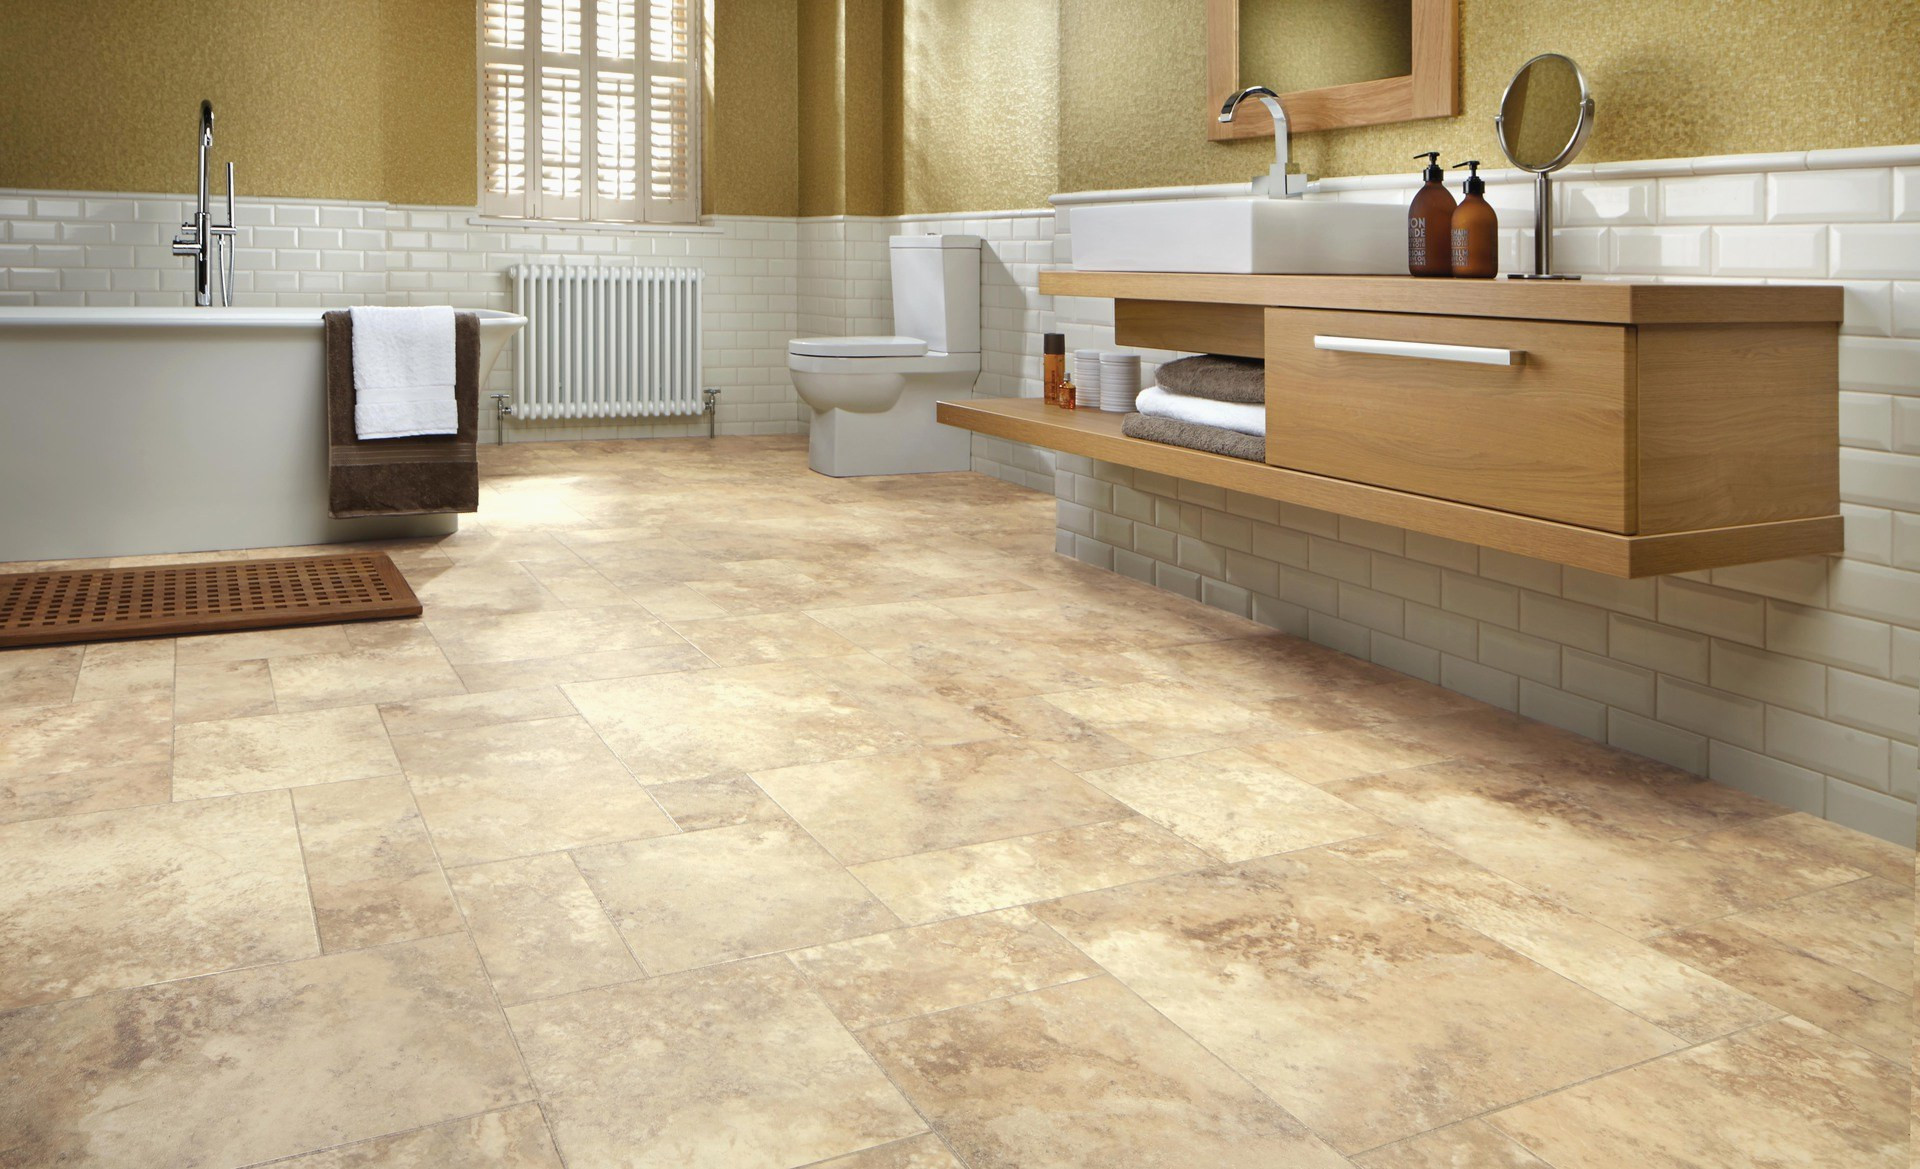 10 attractive How to Install Hardwood Floors Lowes 2024 free download how to install hardwood floors lowes of wood look porcelain tile lowes minimalist perfect floating tile within wood look porcelain tile lowes minimalist perfect floating tile floor lowes bes